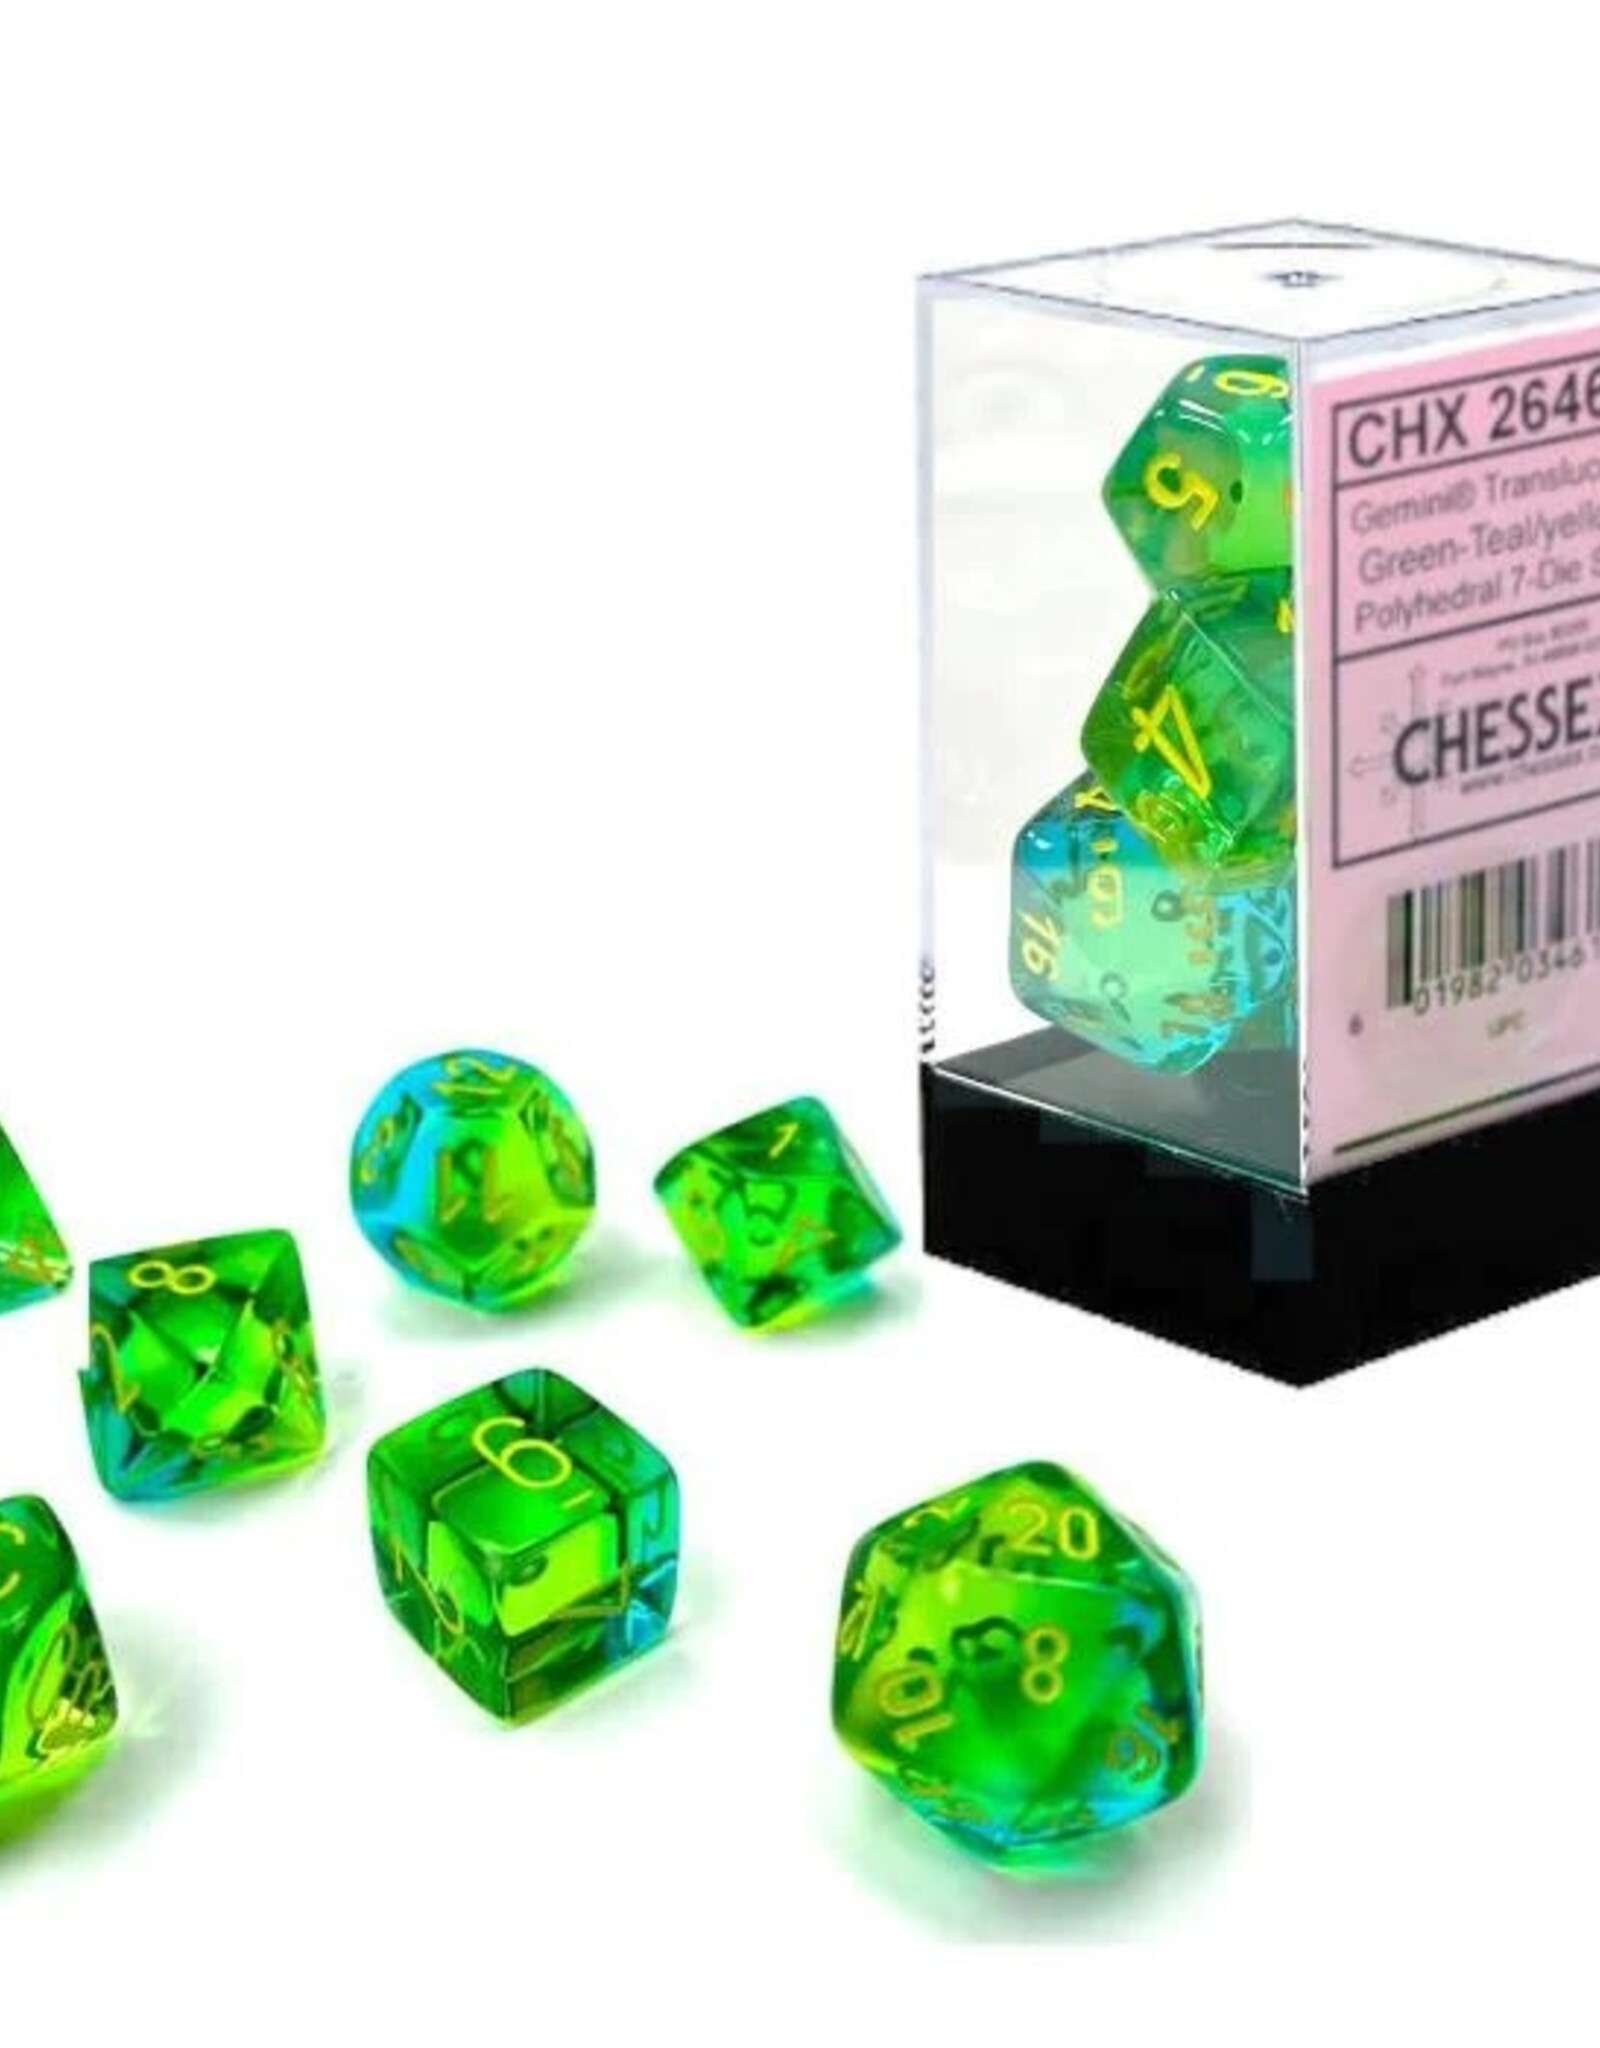 Chessex Dice - 7pc Gemini Translucent Green -Teal/Yellow Polyhedral